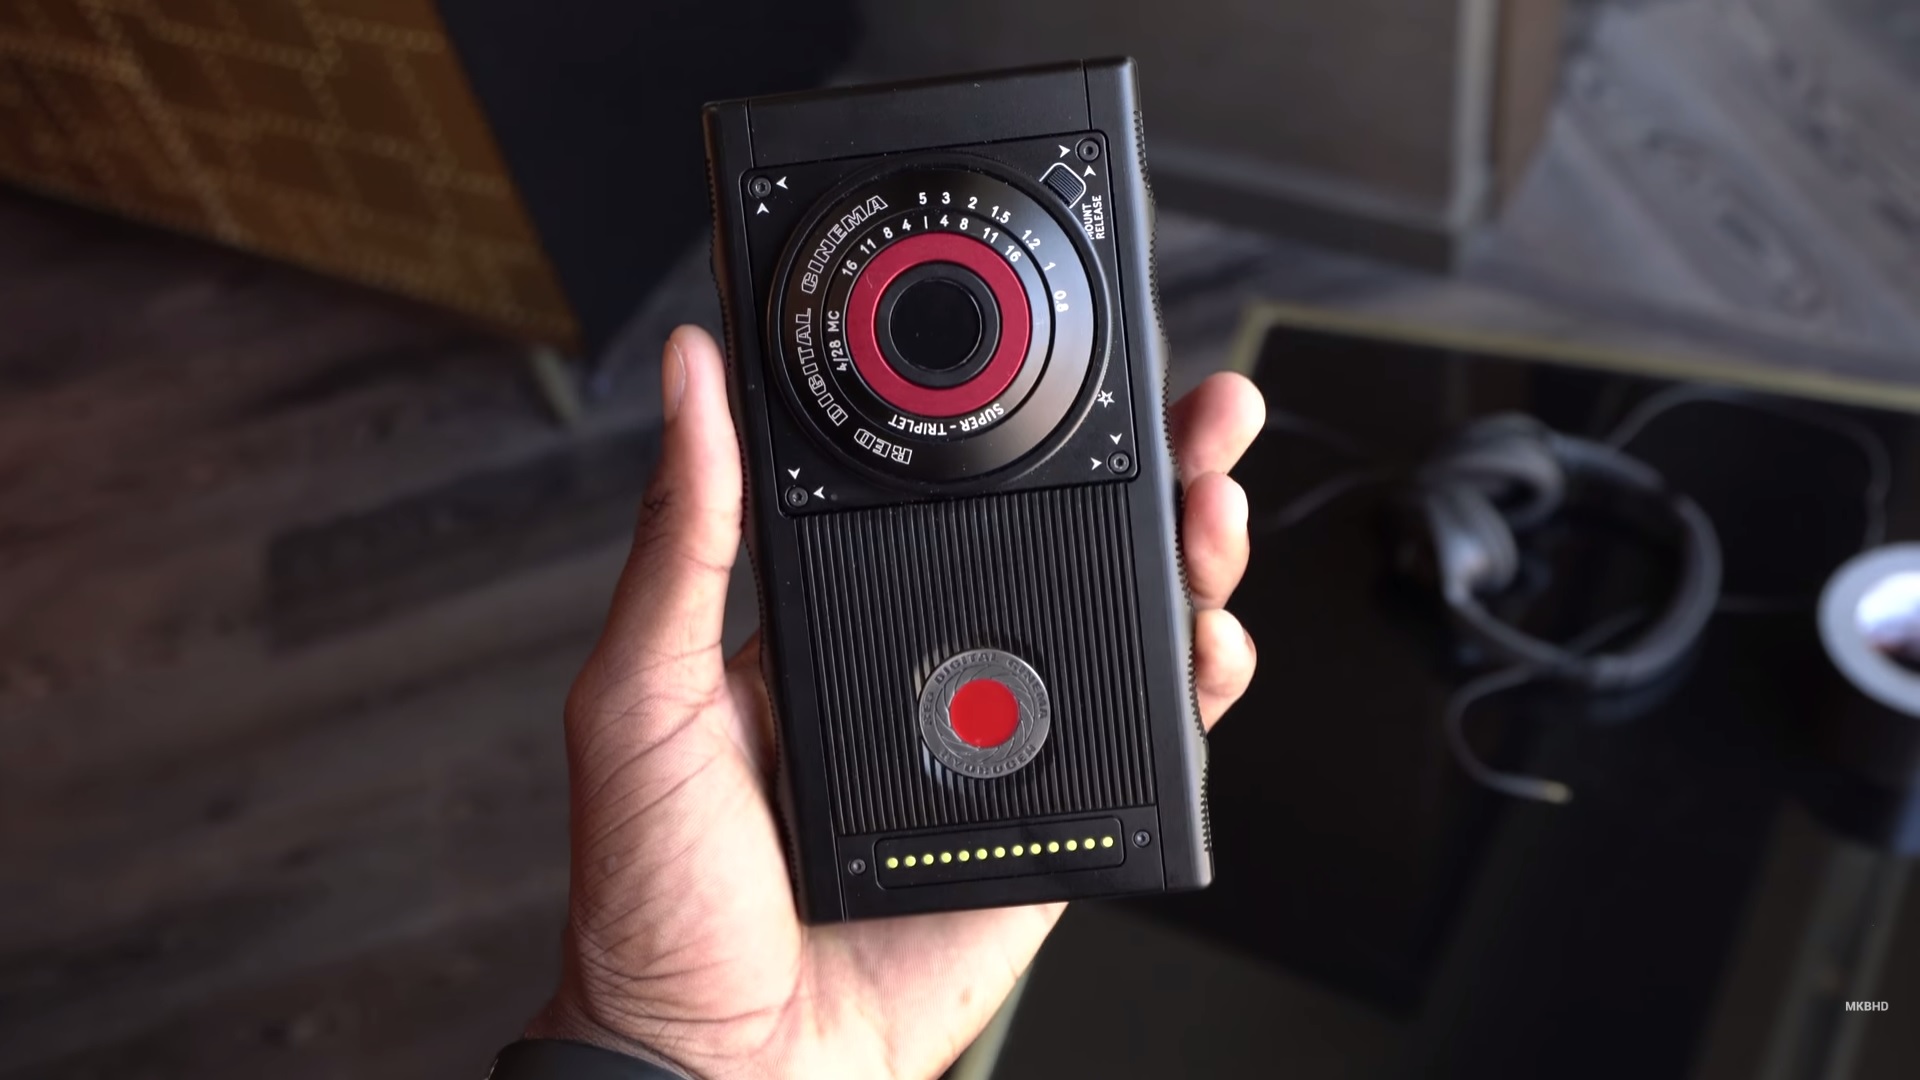 RED's $1,200 holographic phone features snap-on camera accessories